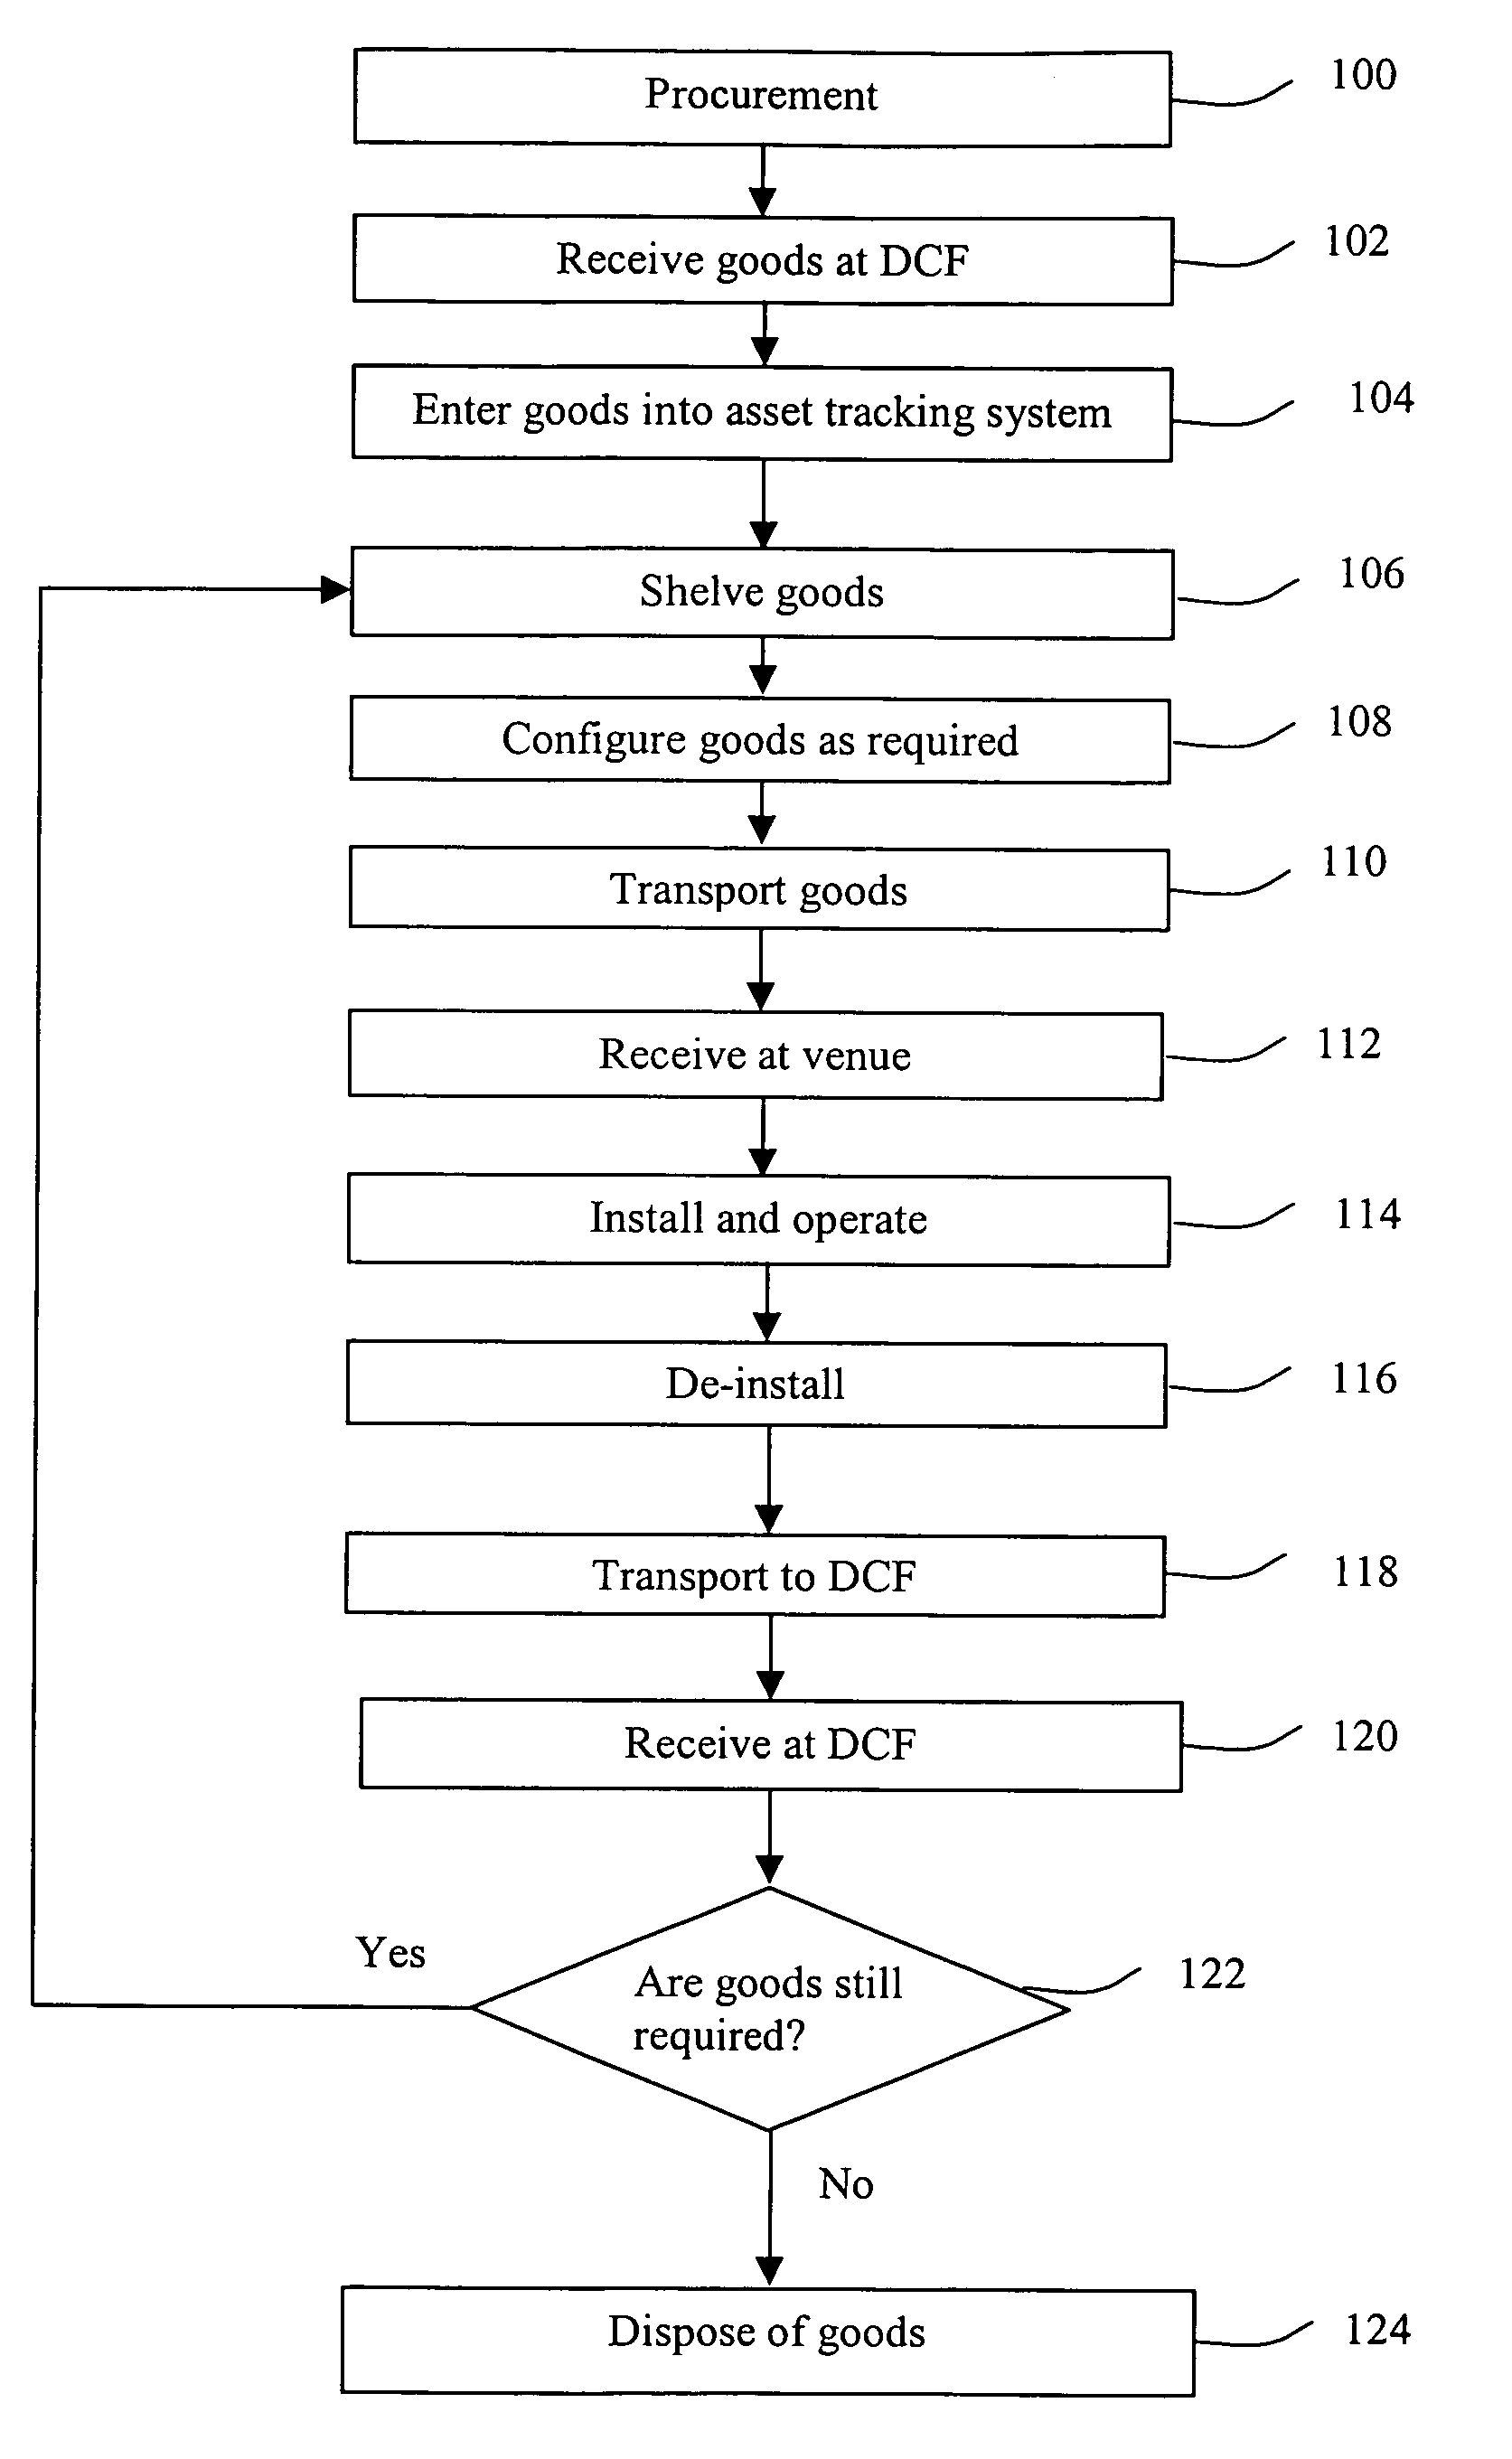 Method and system for tracking computer hardware and software assets by allocating and tagging the asset with an asset tag barcode having a software distribution system (SDS) number and verifying the asset tag barcode upon entry of the asset at a destination site